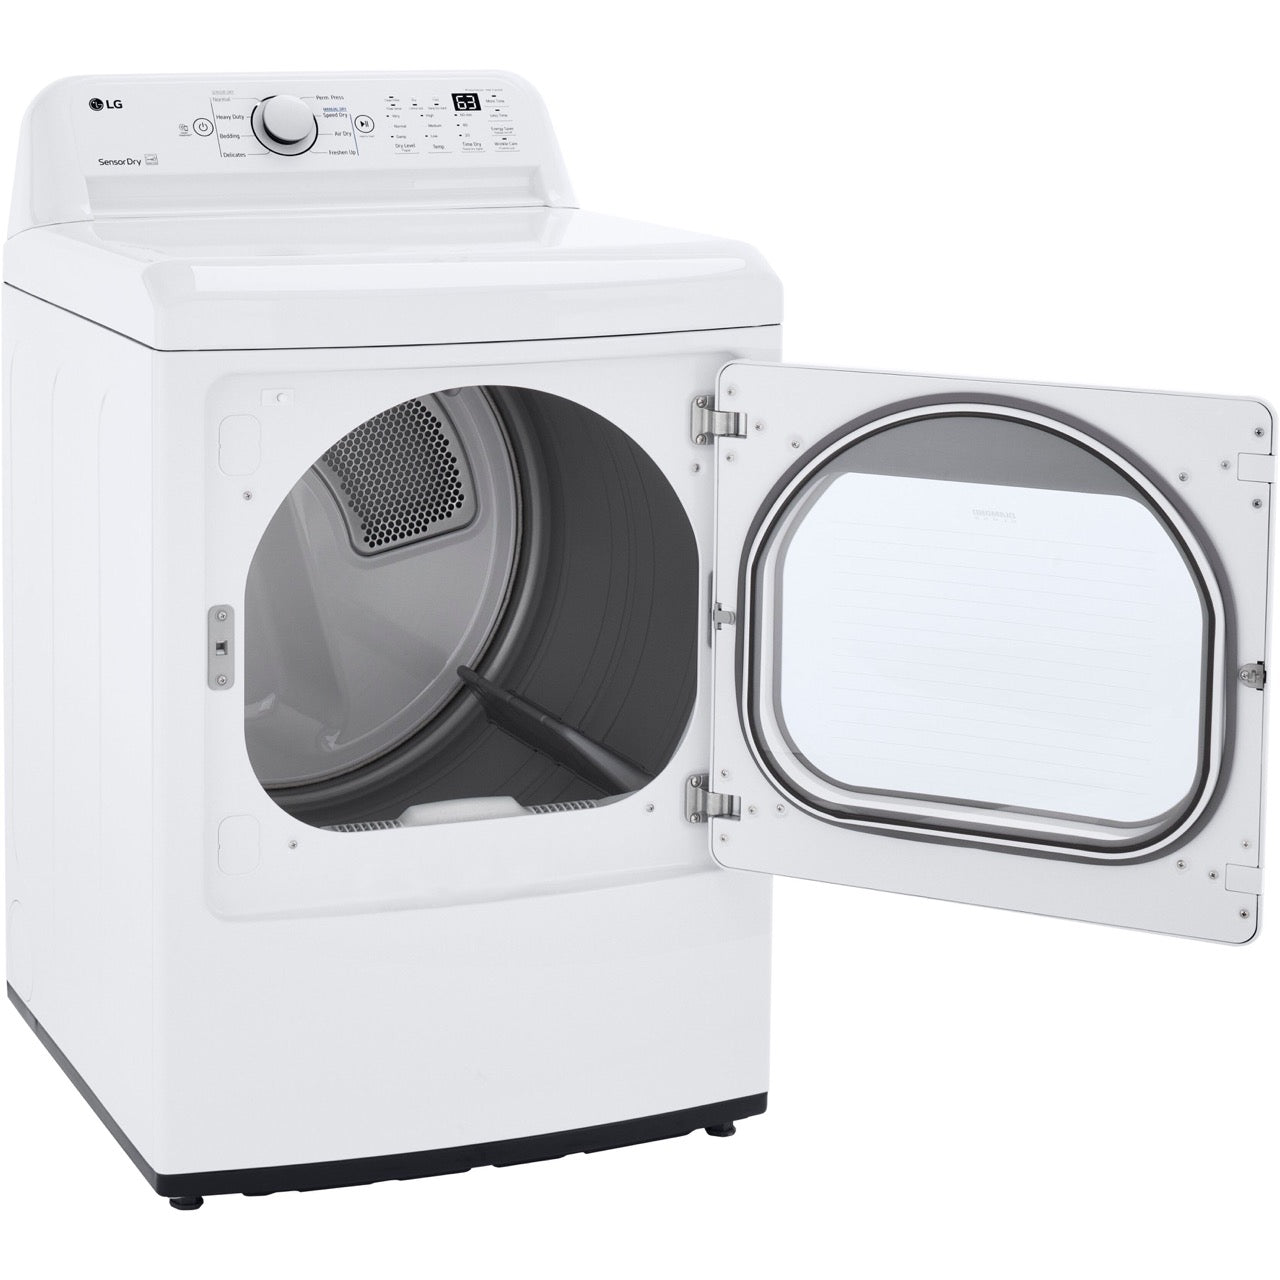 LG 7.3-cu. ft. Ultra Large Capacity Electric Dryer with Sensor Dry Technology in White (DLE7150W)